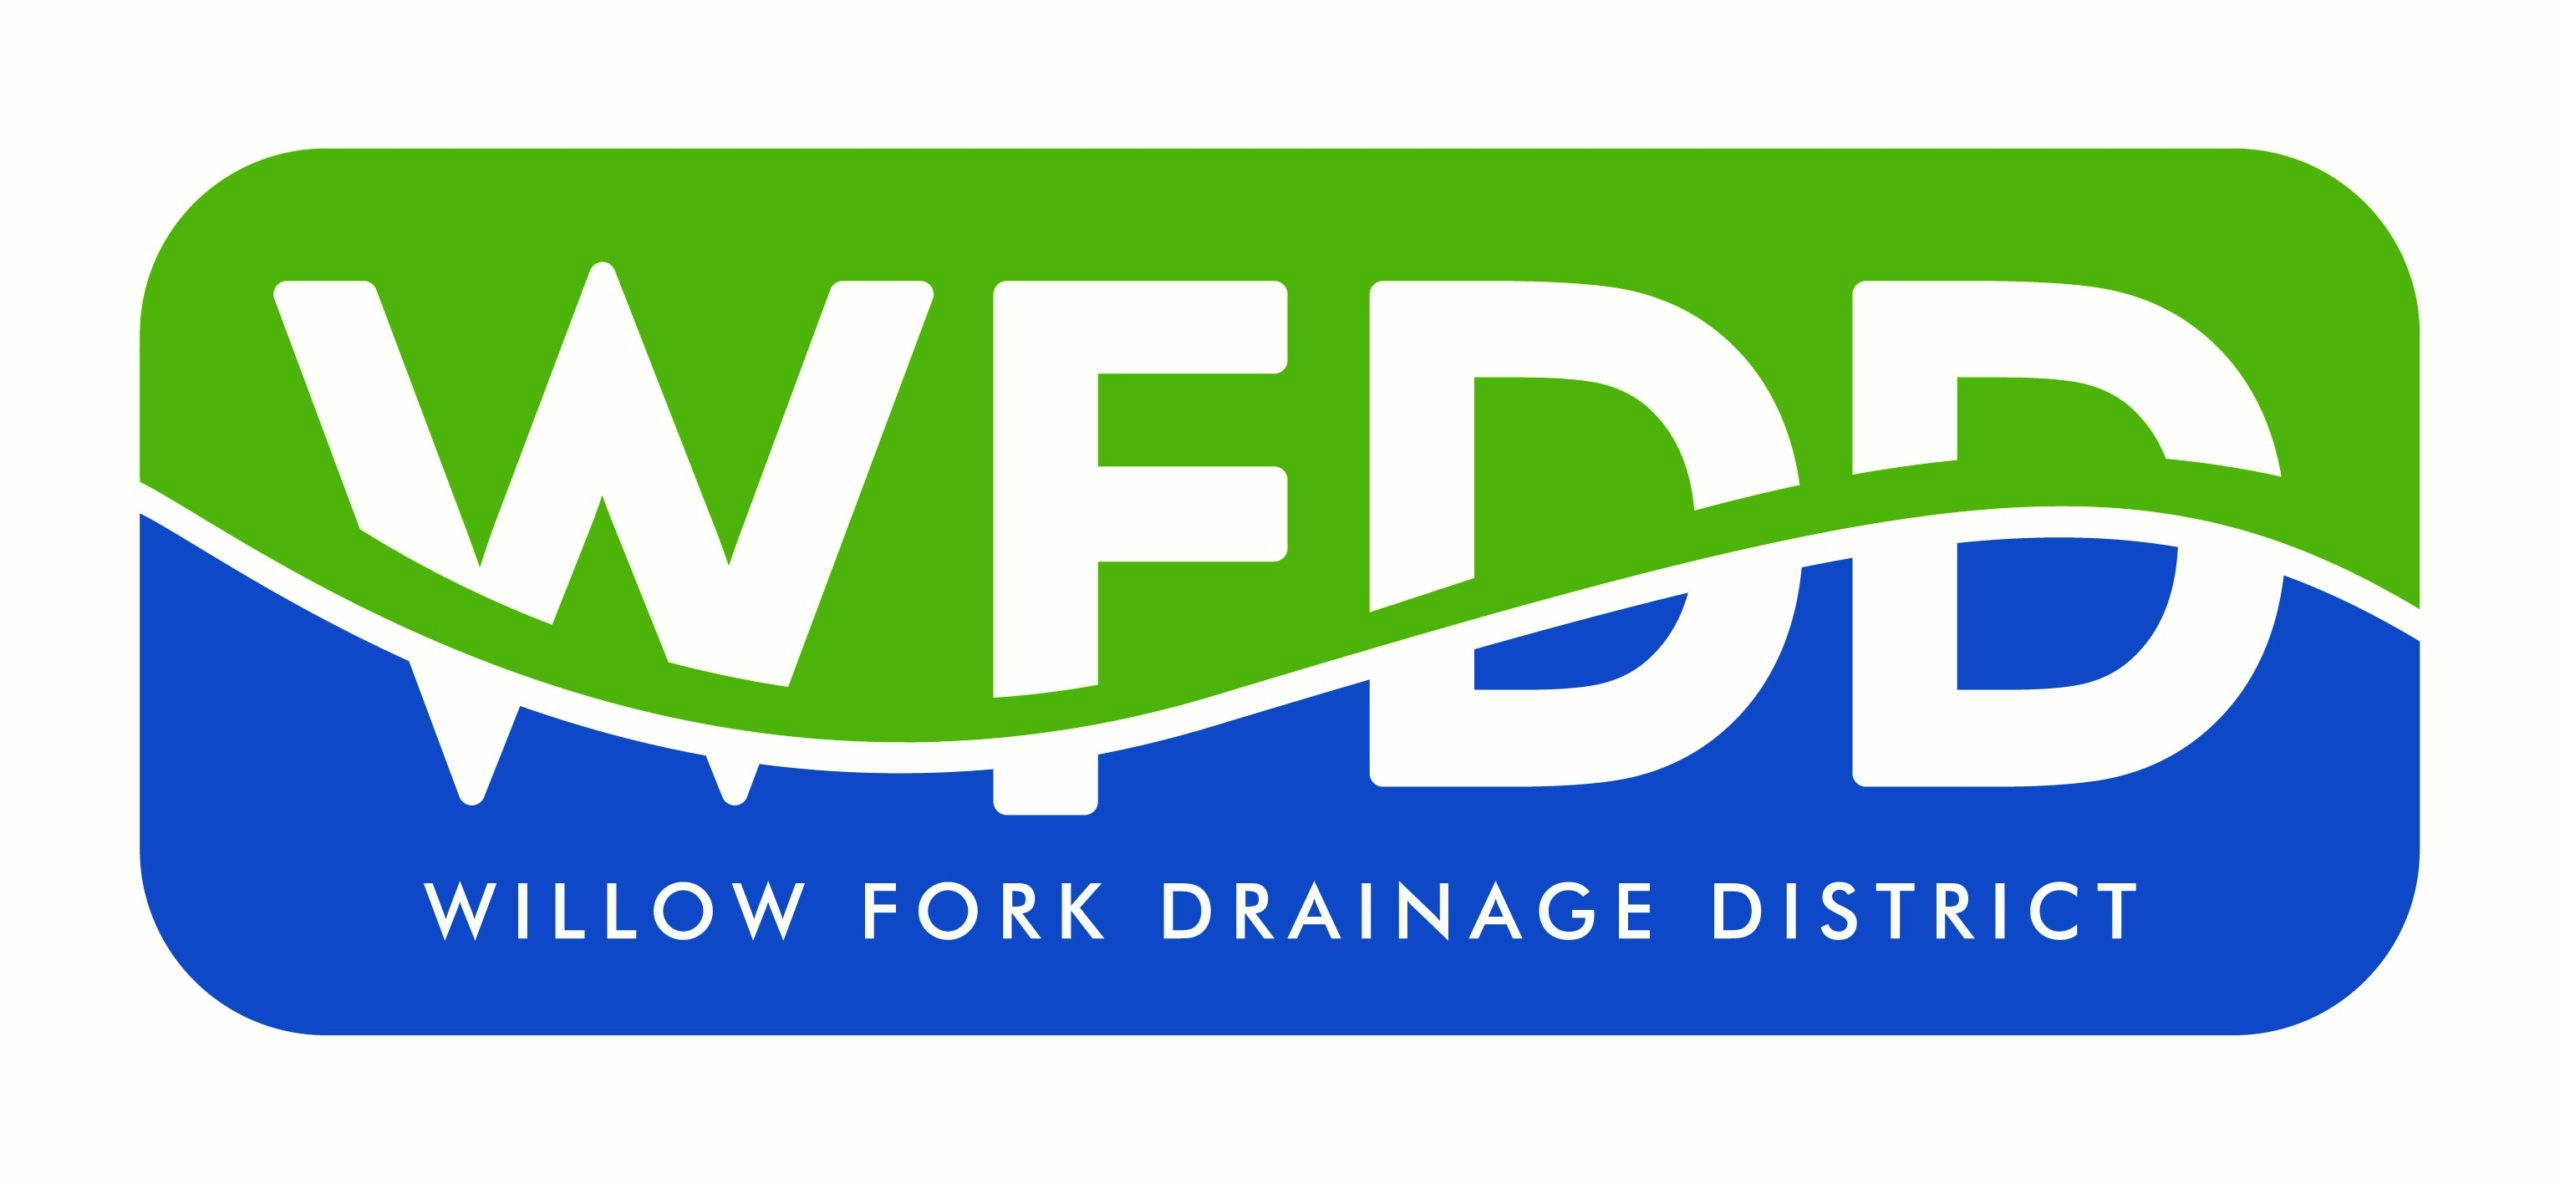 Willow Fork Drainage District